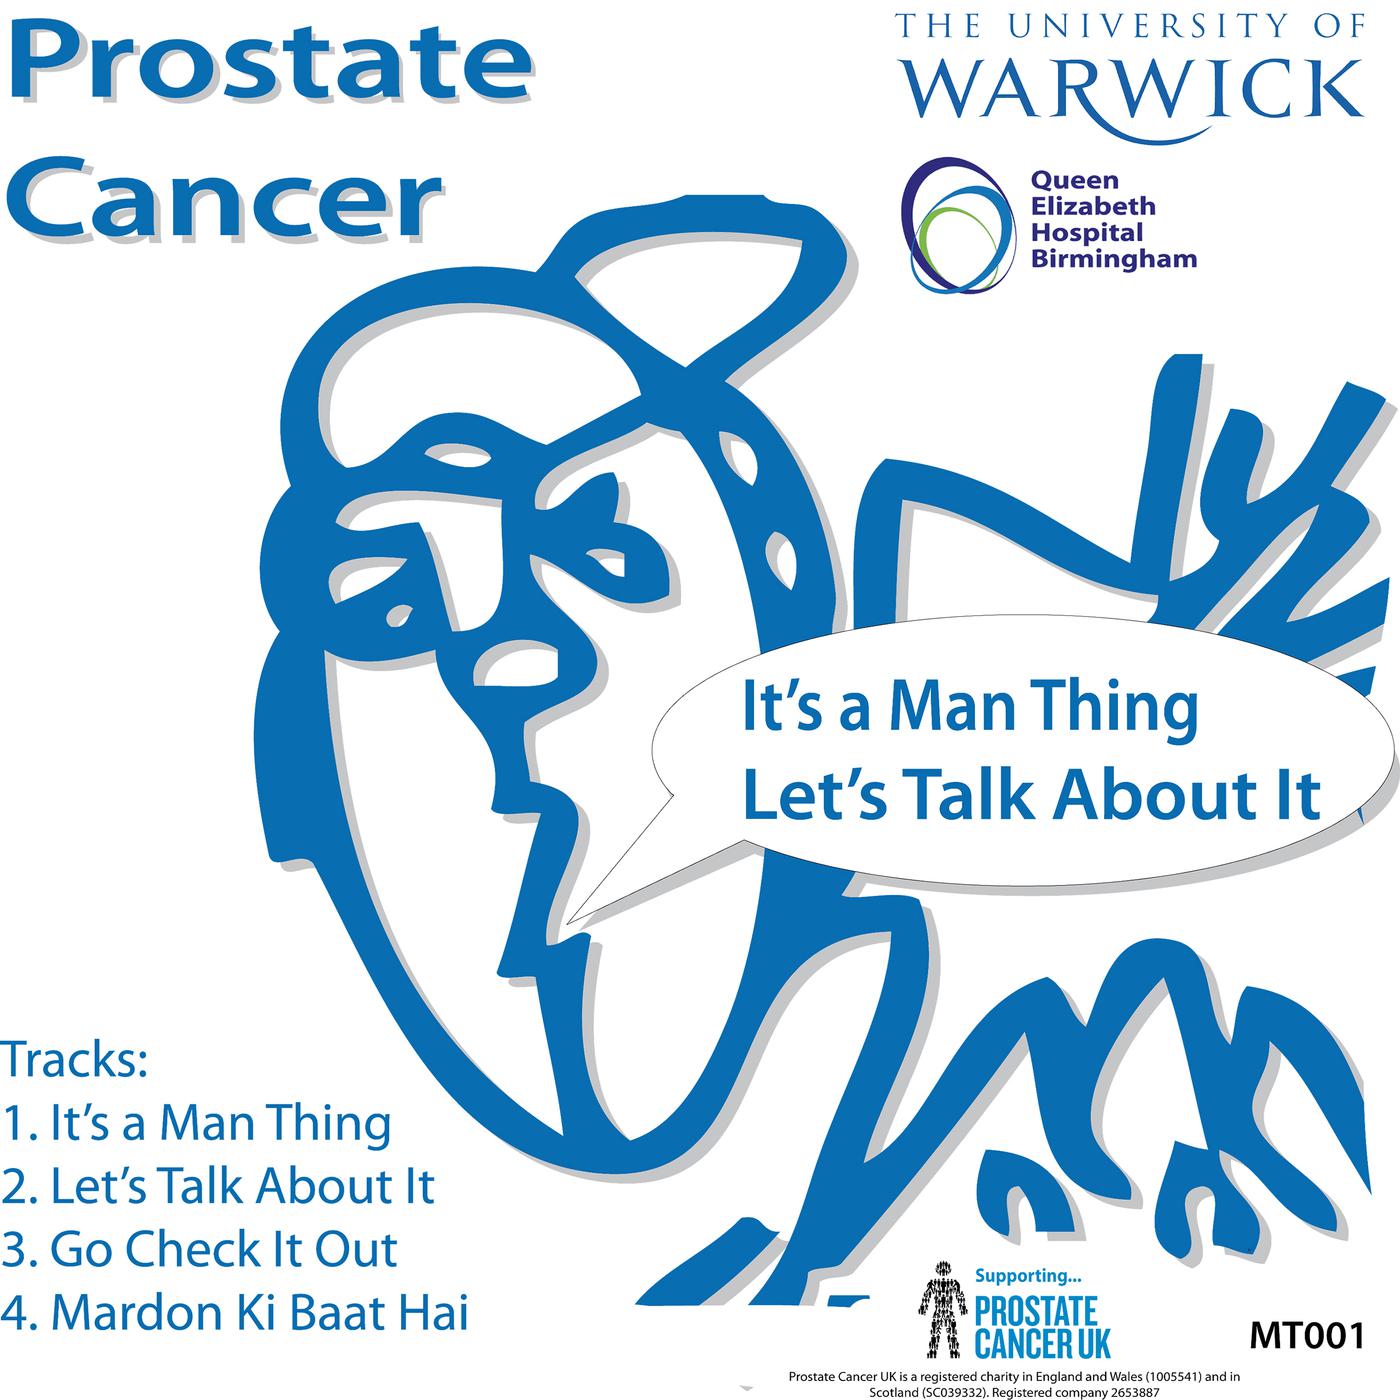 It's a Man Thing (Prostate Cancer Charity)